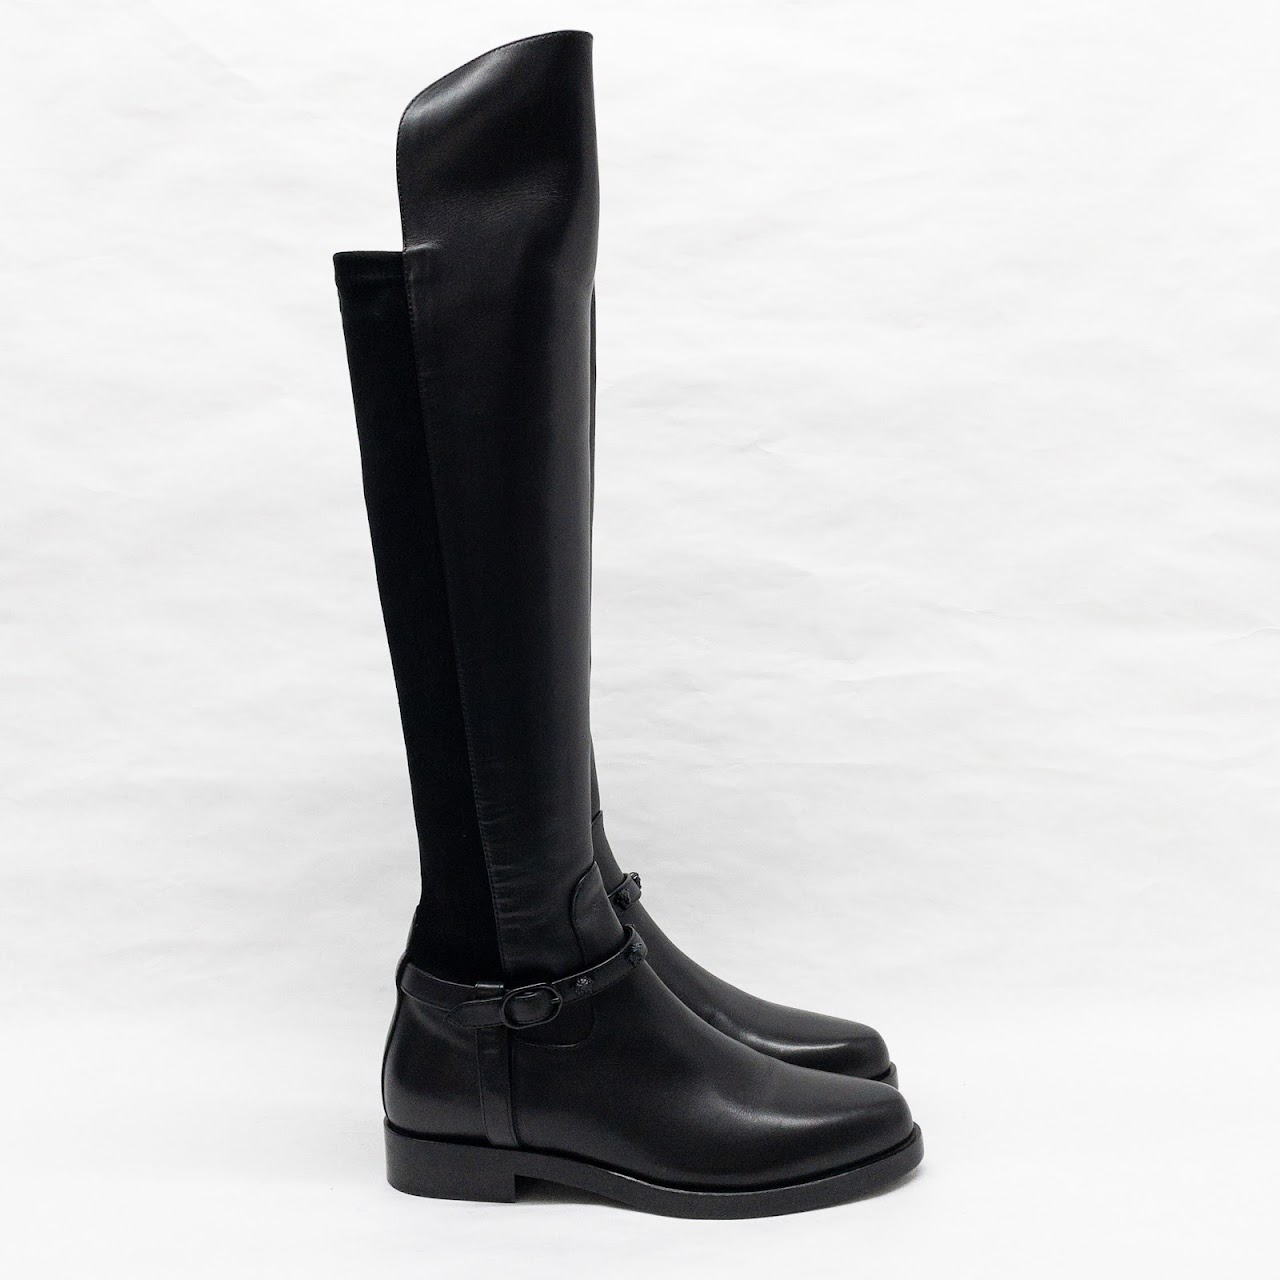 Versace MINT Black Leather & Suede Knee High Boots